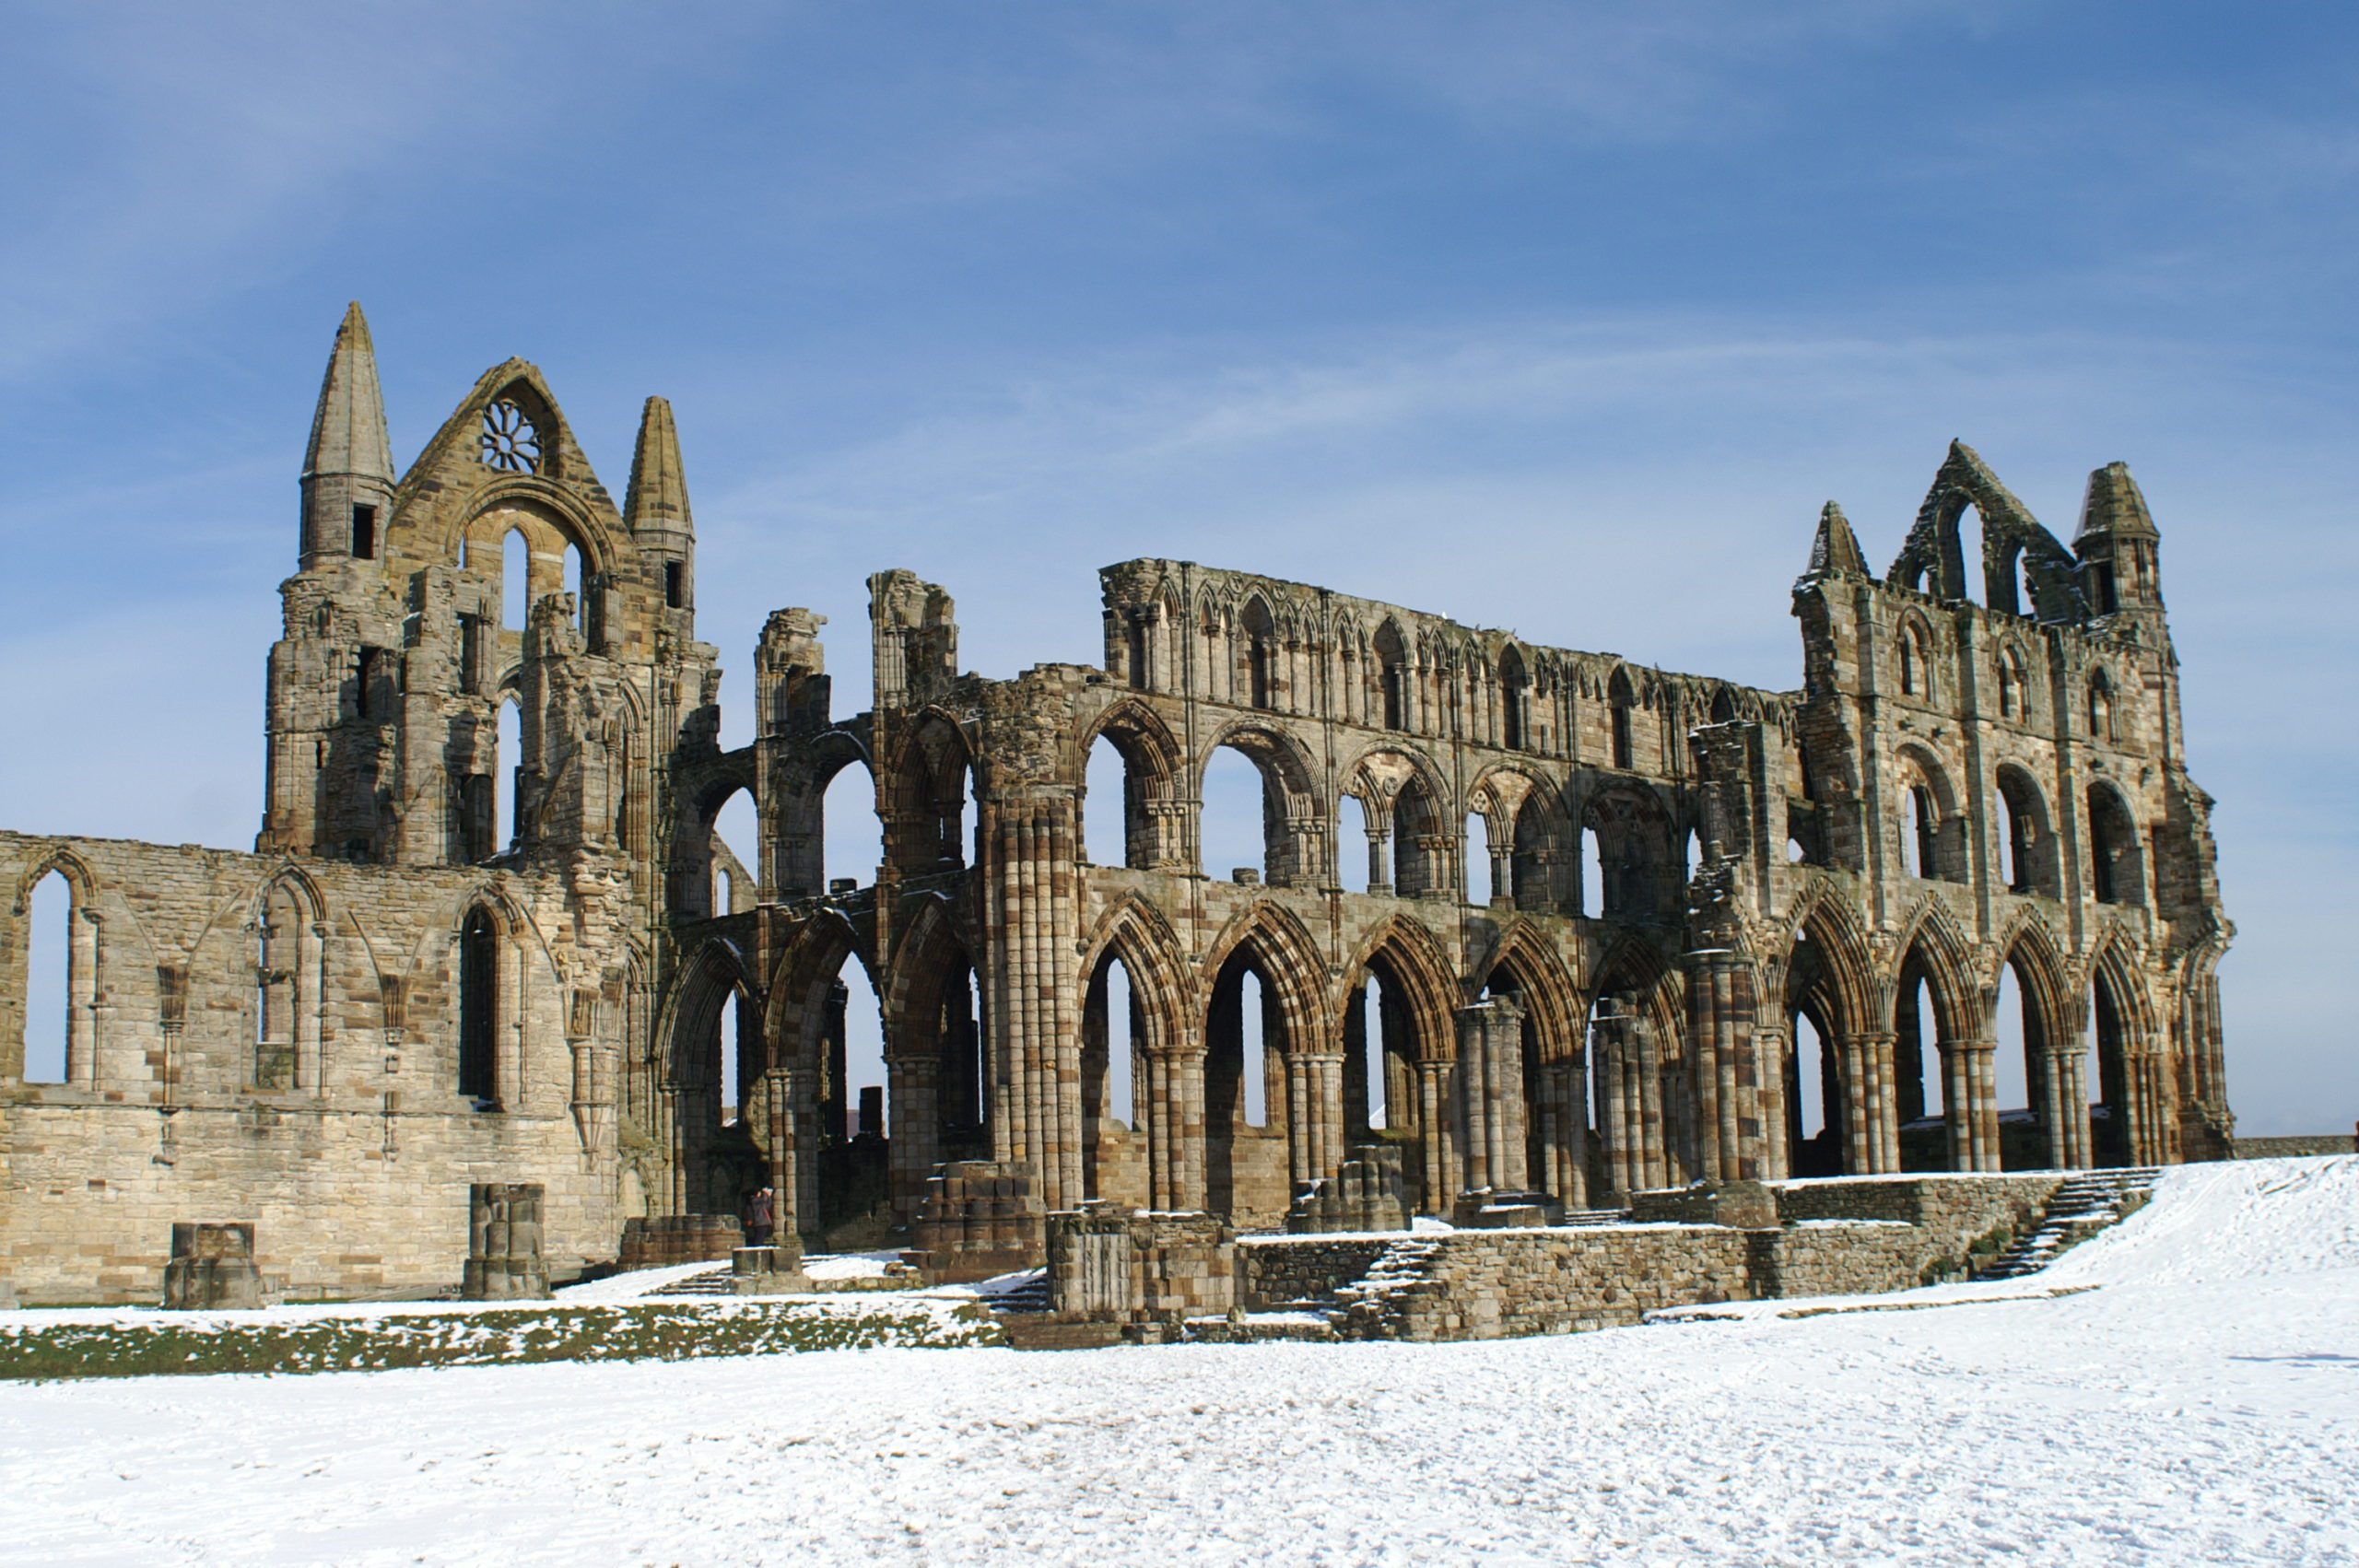 Whitby Abbey in the snow